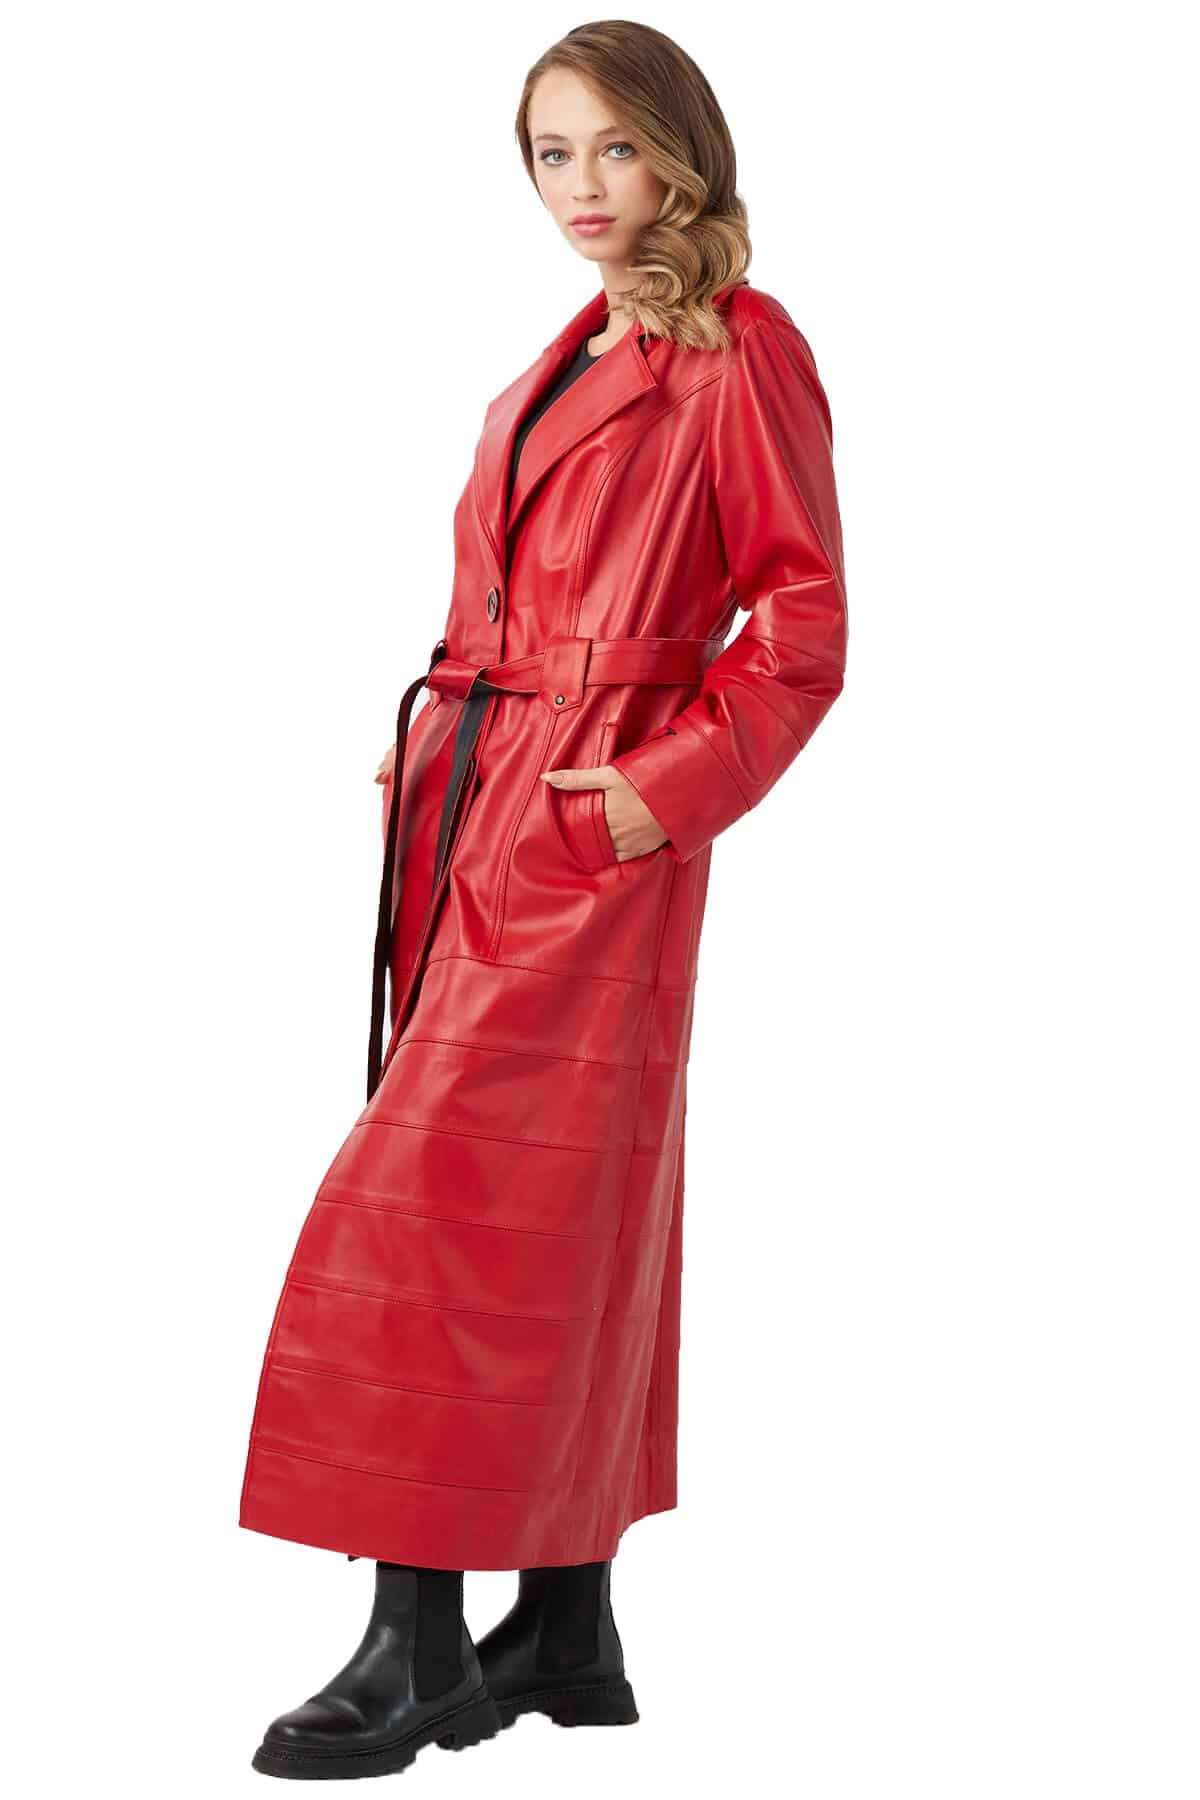 Rita Women's 100 % Real Red Leather Topcoat